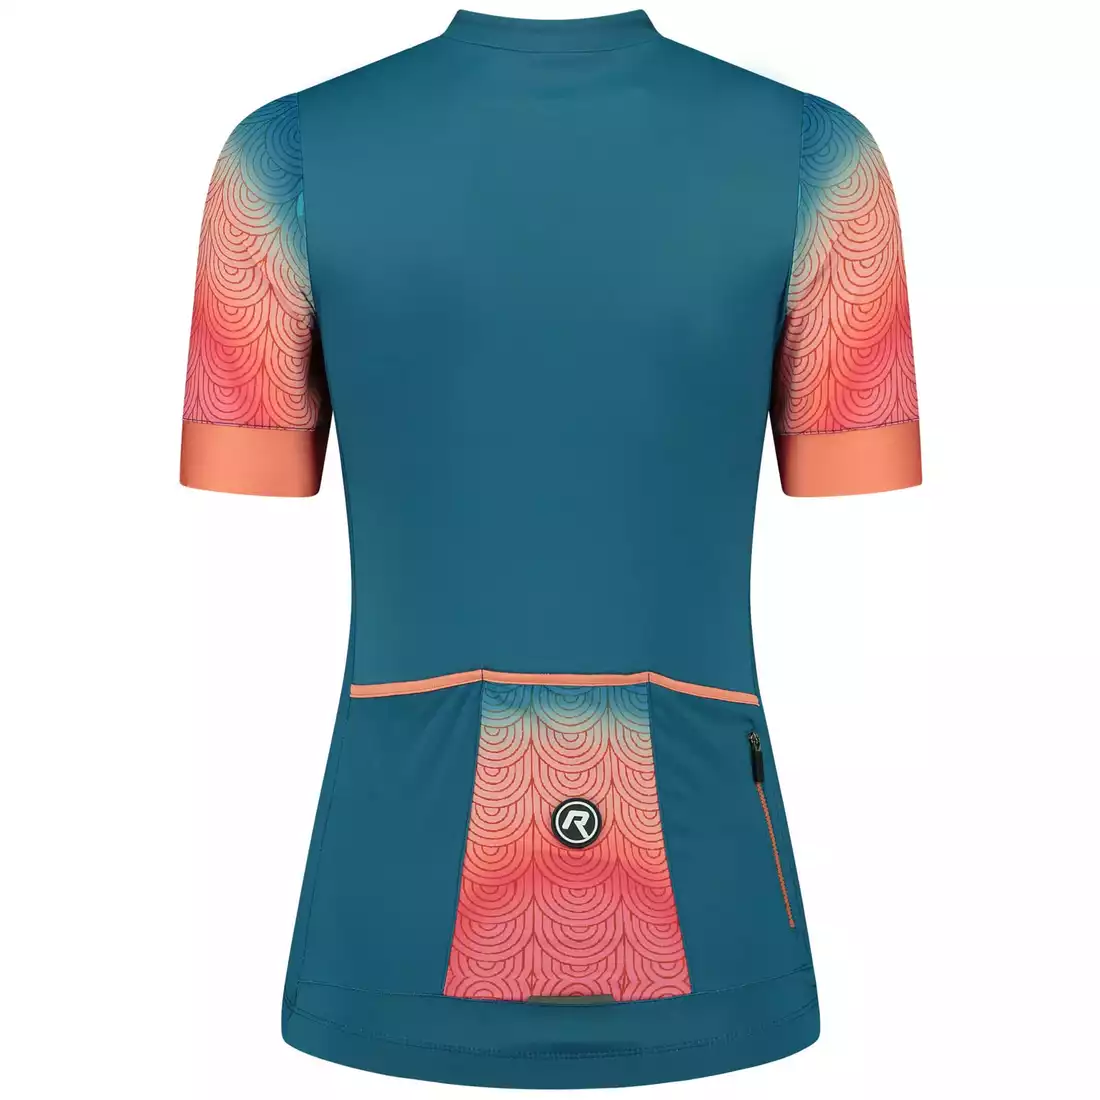 Rogelli WAVES women's cycling jersey, blue-coral